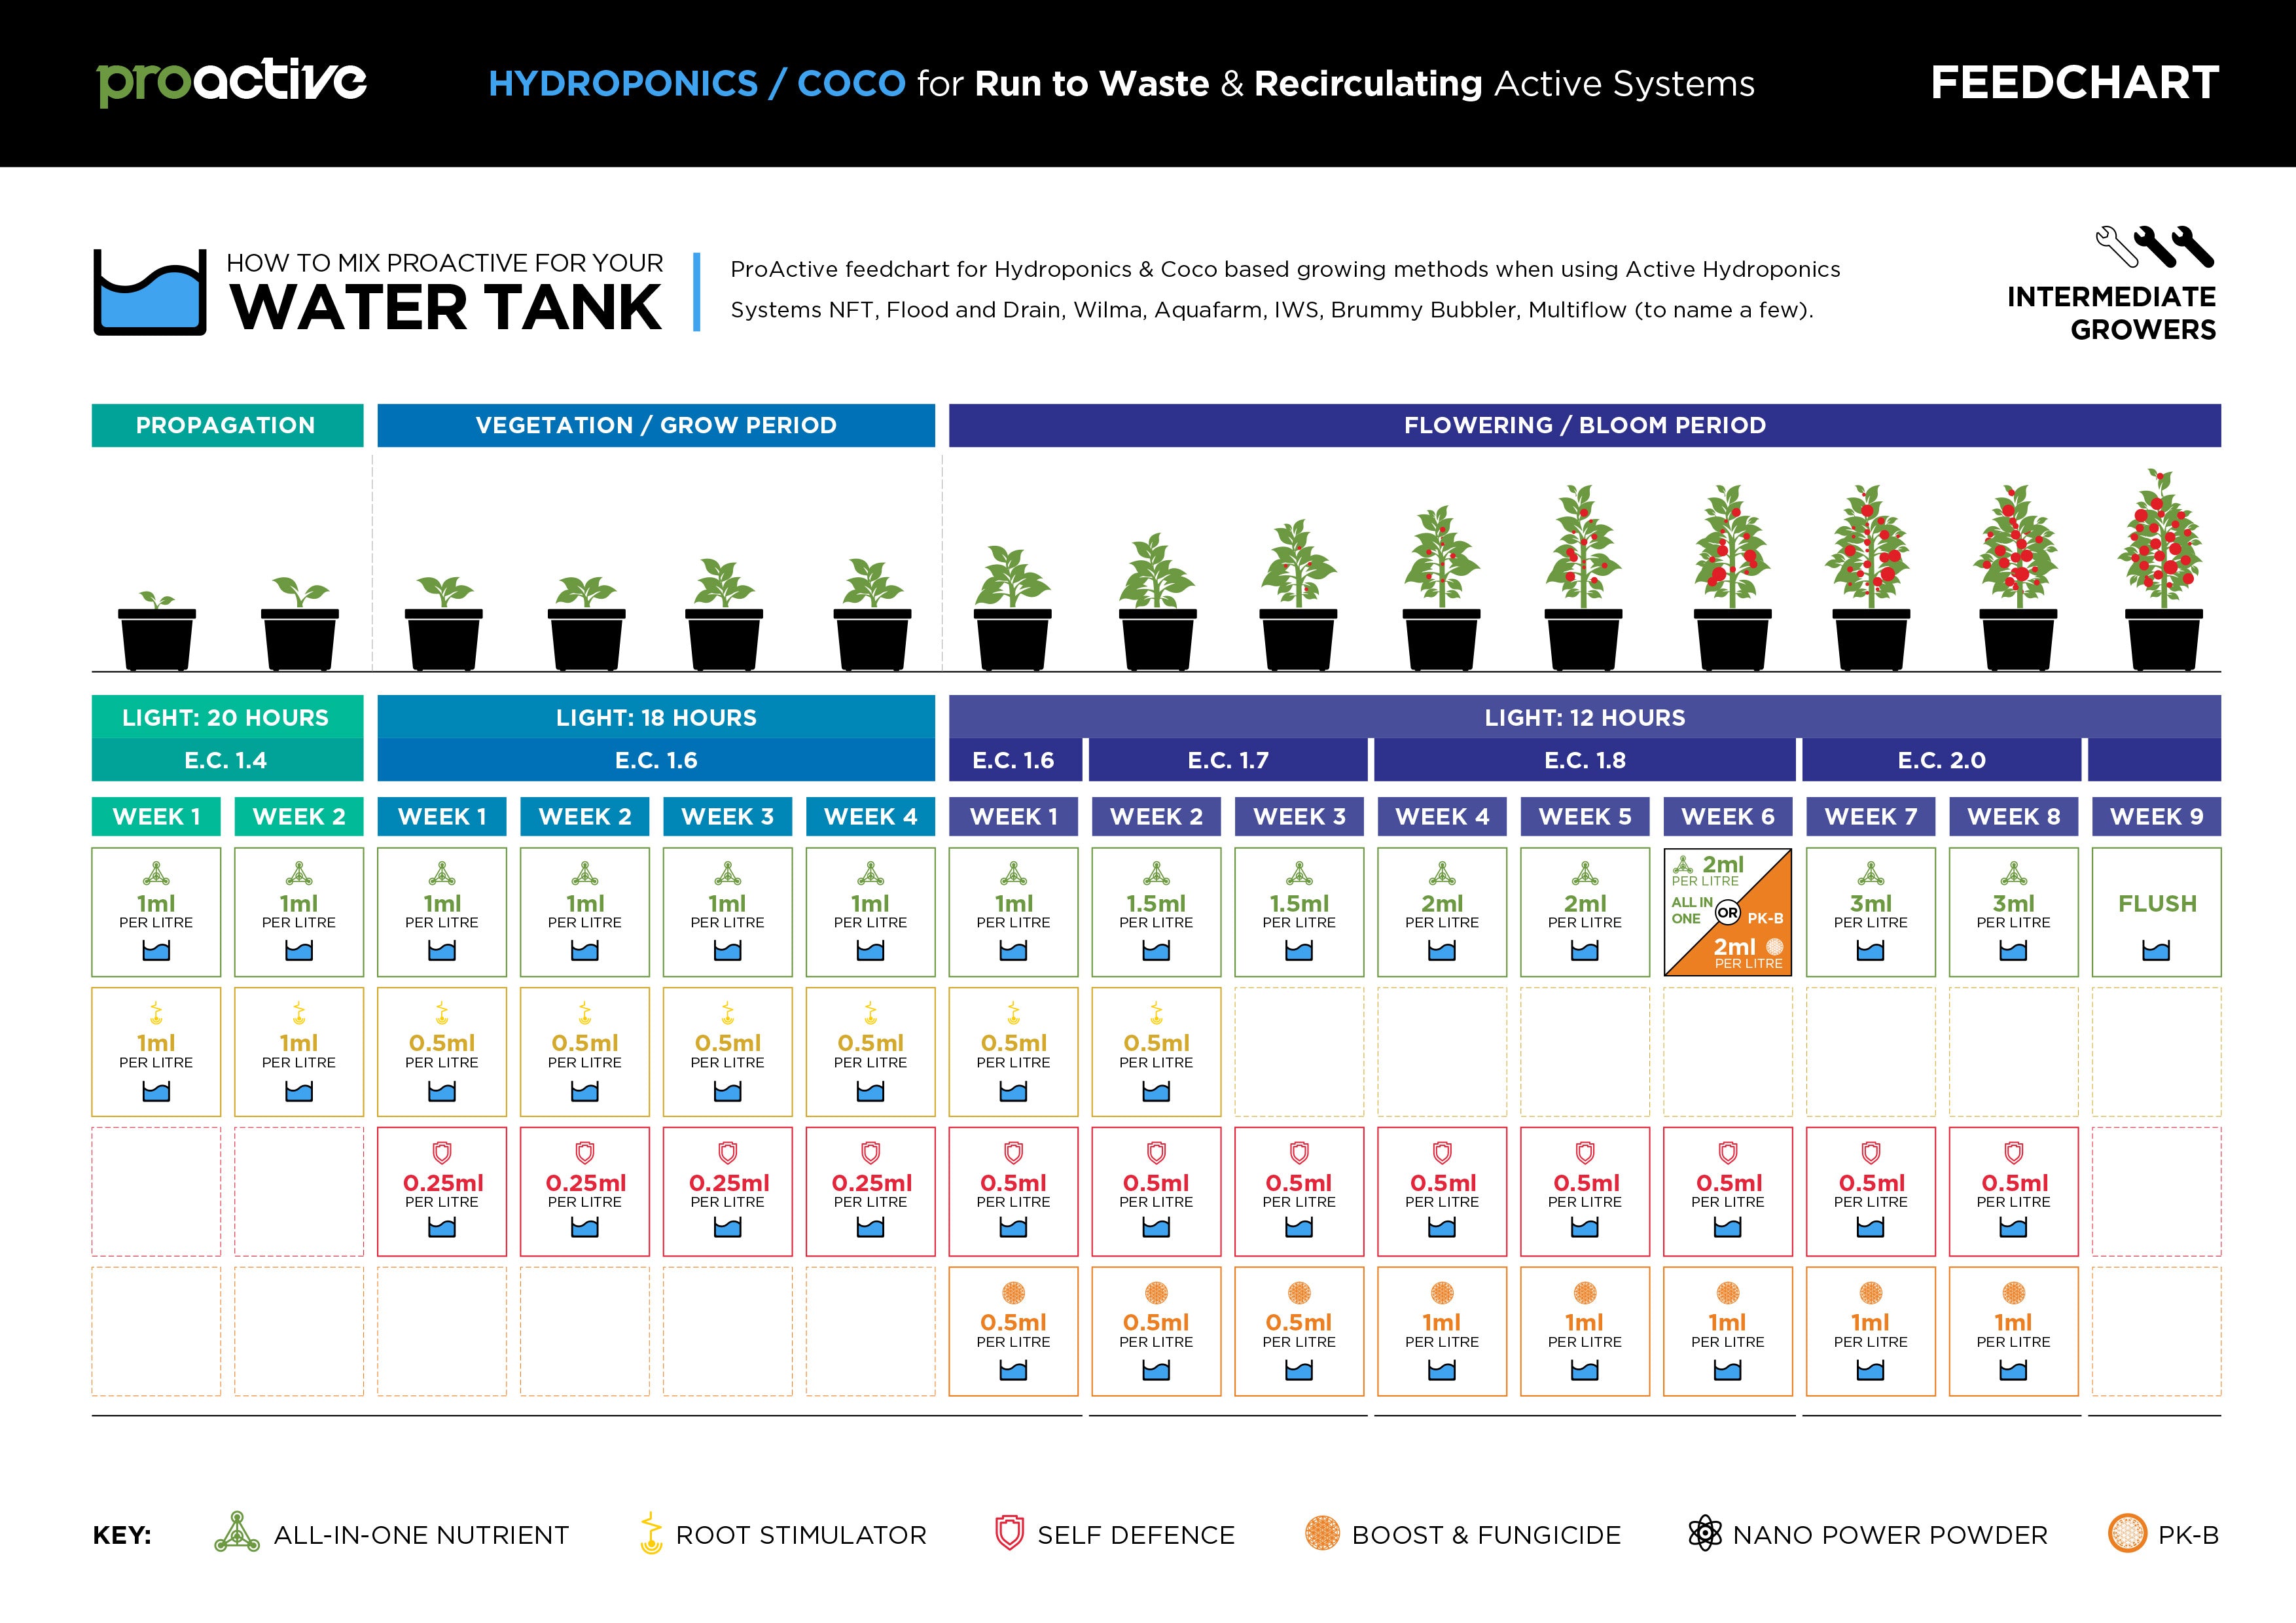 ProActive Hydroponics & Coco Active Recirculating and Run to Waste Systems - Feedchart